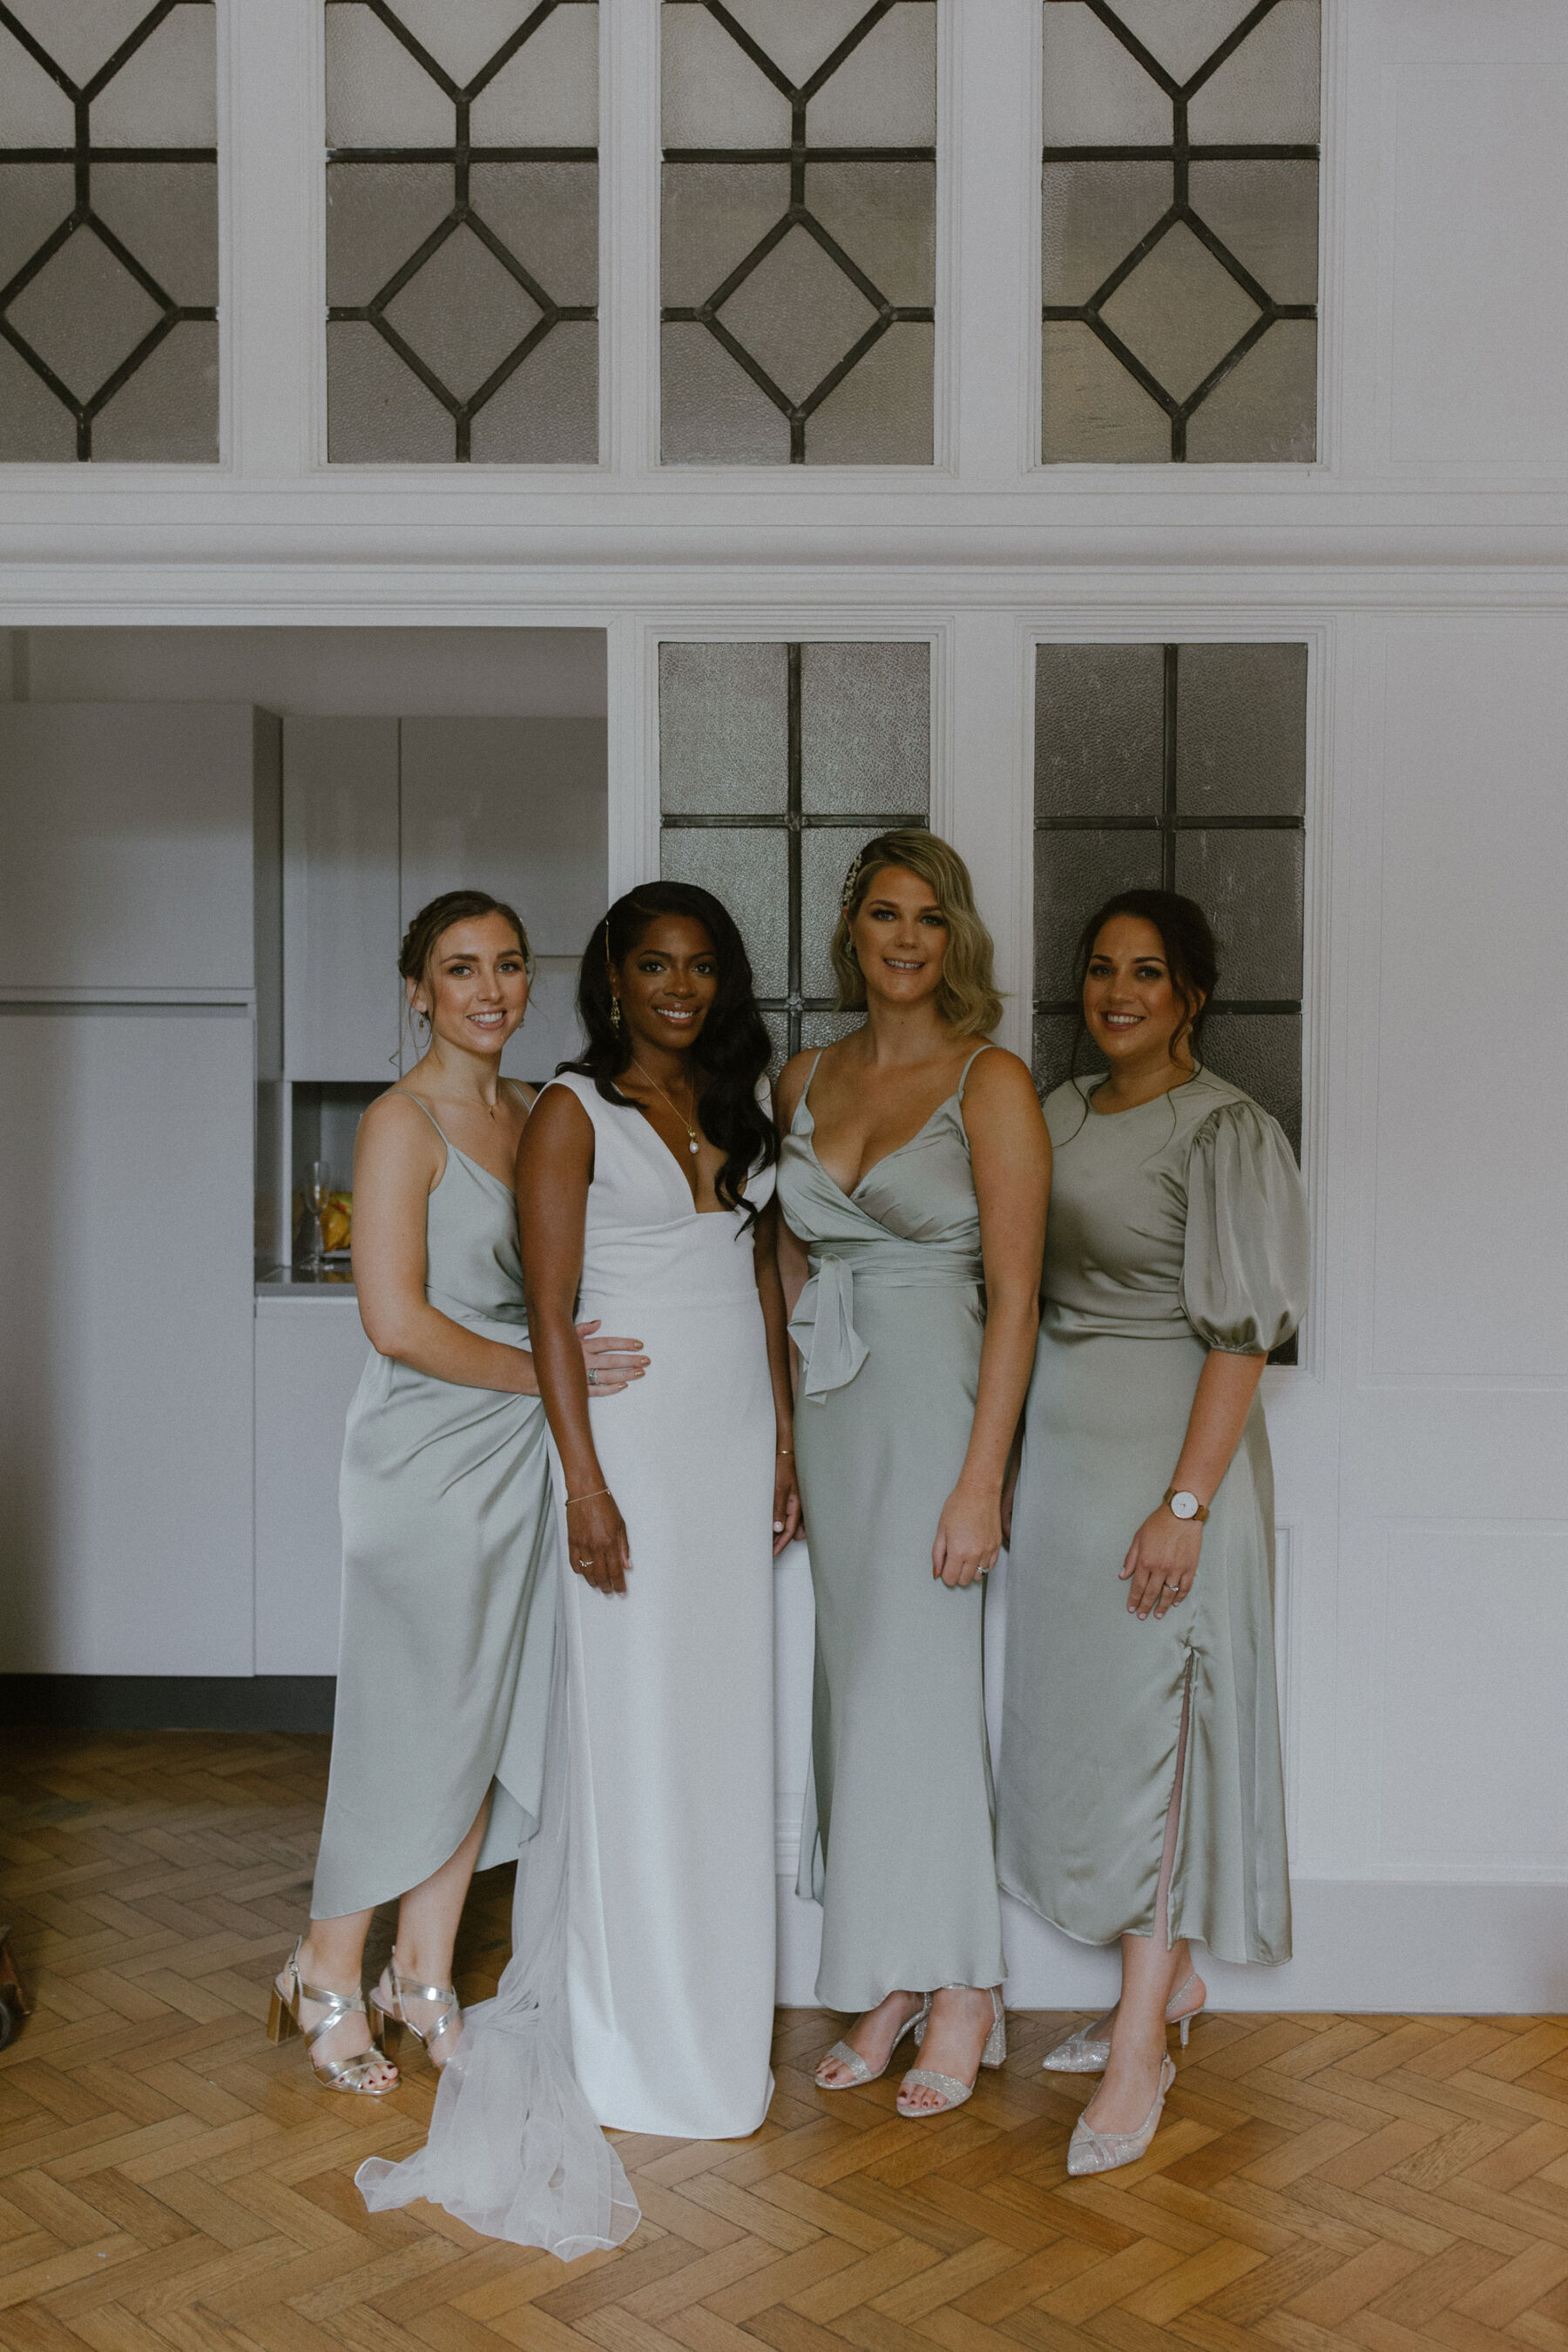 Black bride in a chic, minimalist wedding dress by Sarah Seven, sanding with 3 bridesmaids in sage green dresses. Ruth Atkinson Photography.